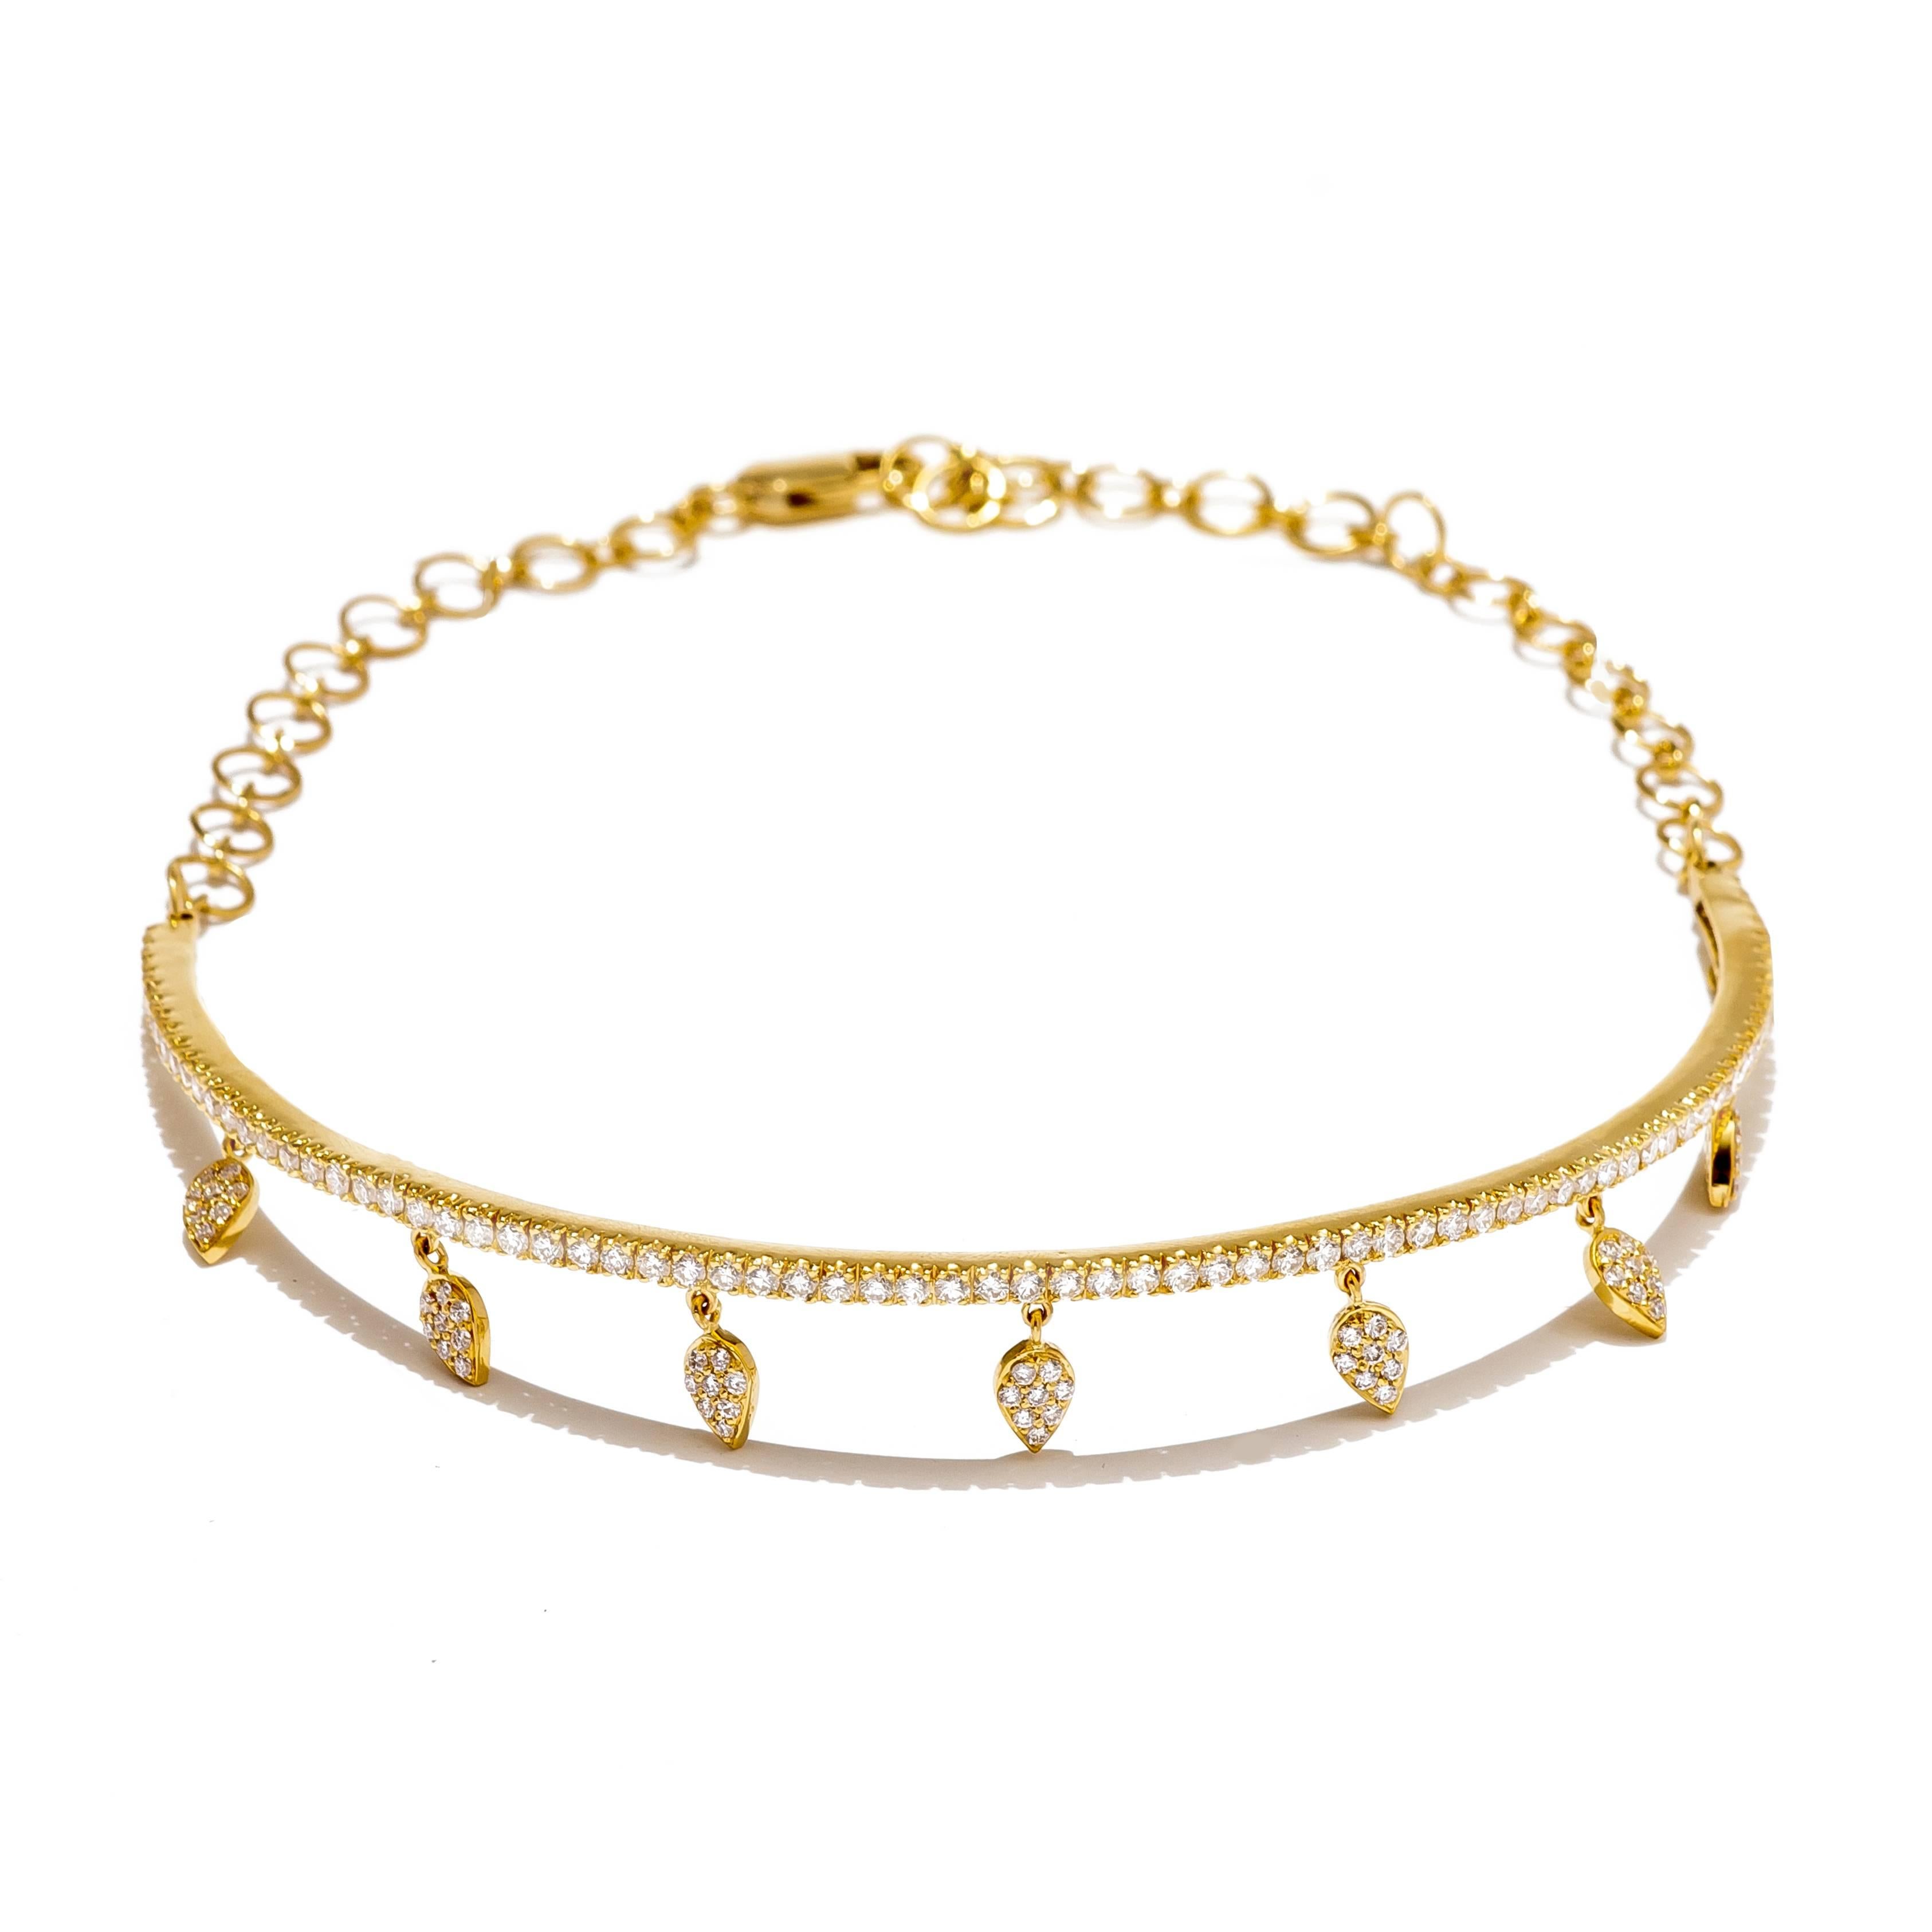 Handcrafted in 18 Karat yellow gold with diamonds weighing 4.18cts. This feminine choker has a stiff front diamond bar with a chain closure in the back, allowing for adjustability of size and placement on the neck. Each petal is hand articulated and